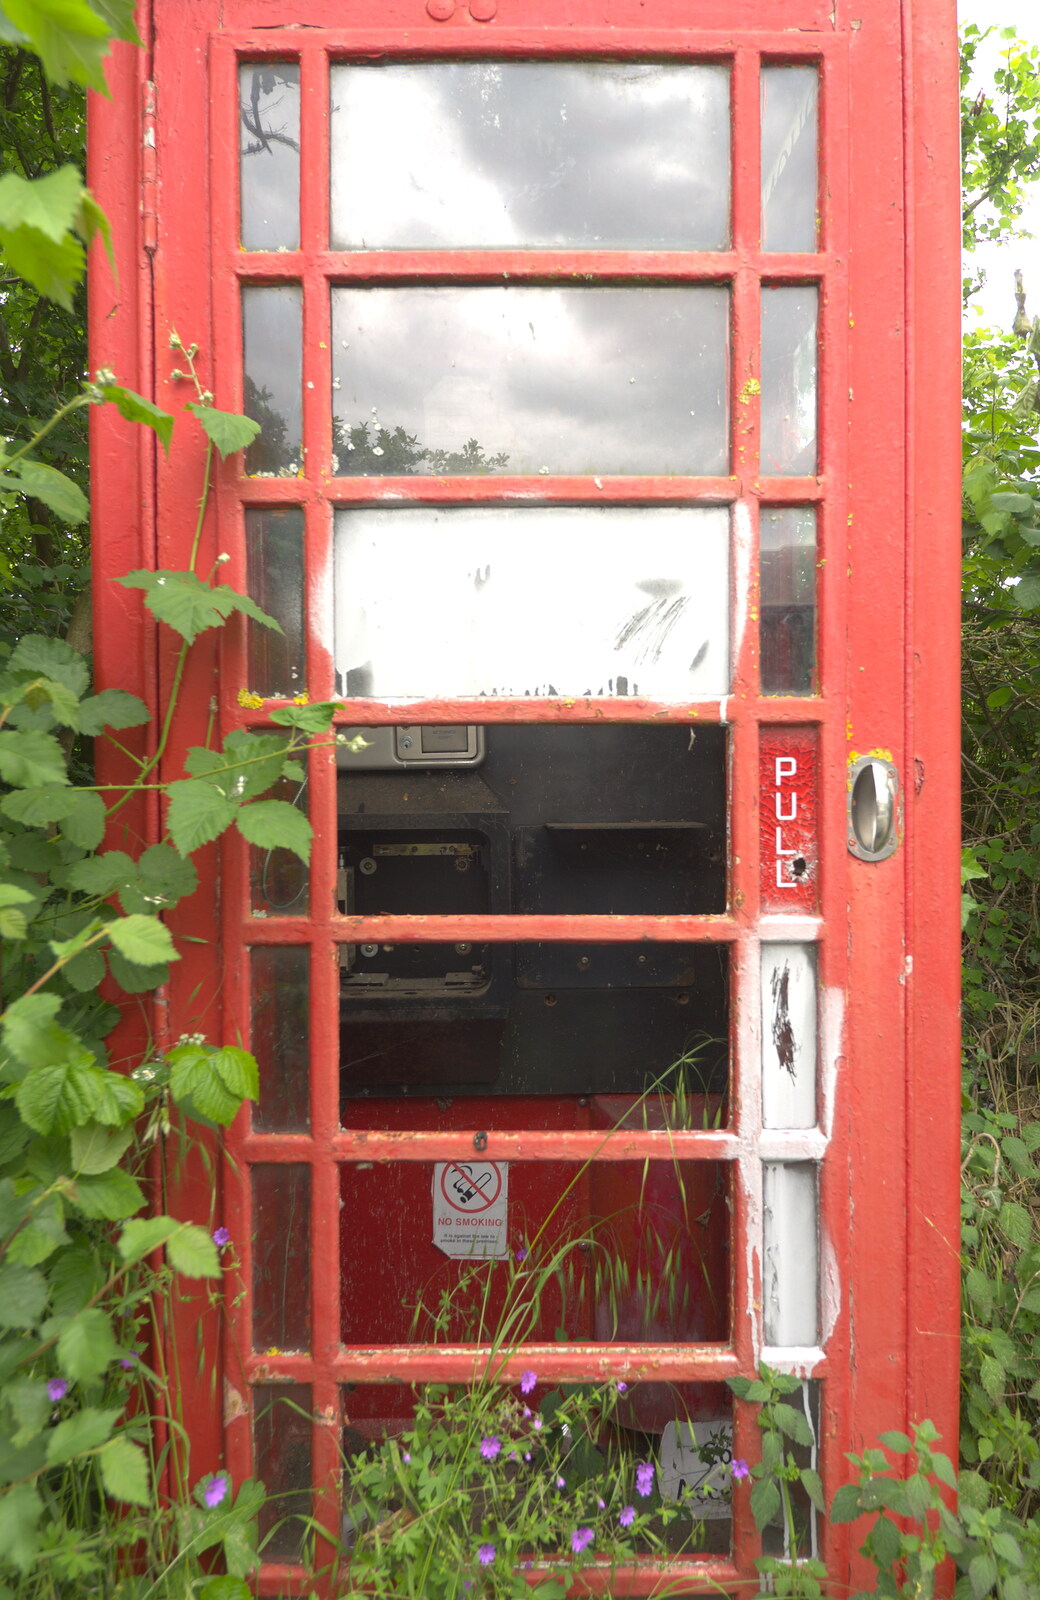 Missing windows in the derelict phonebox from A Night at the Crown Hotel, Southwold, Suffolk - 13th June 2012